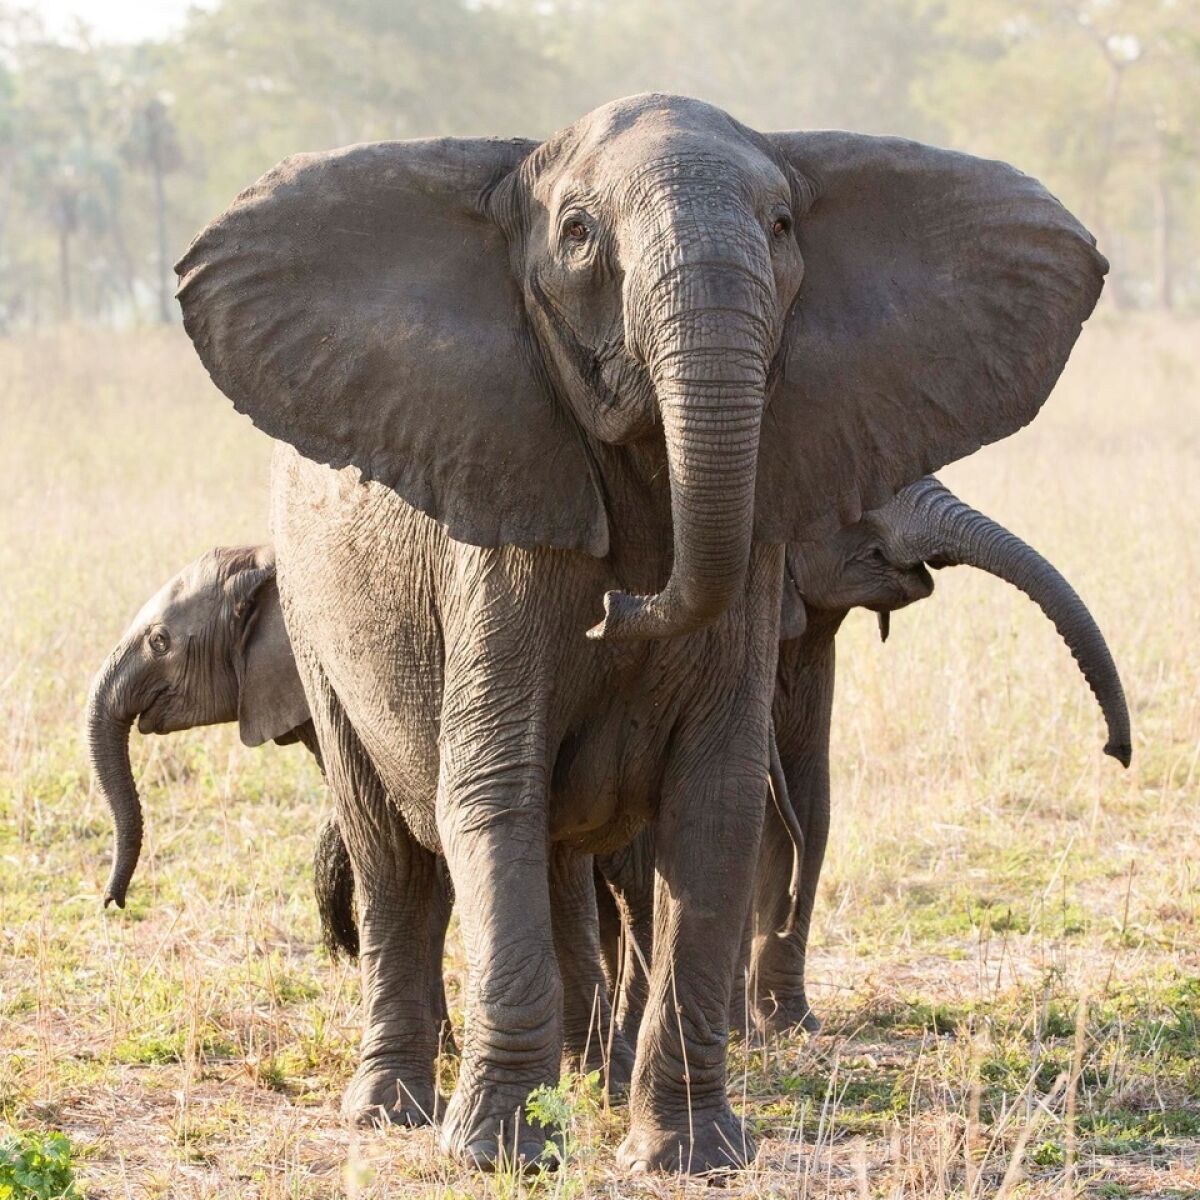 Tuskless elephant matriarch with her two calves in the Gorongosa National Park in Mozambique.